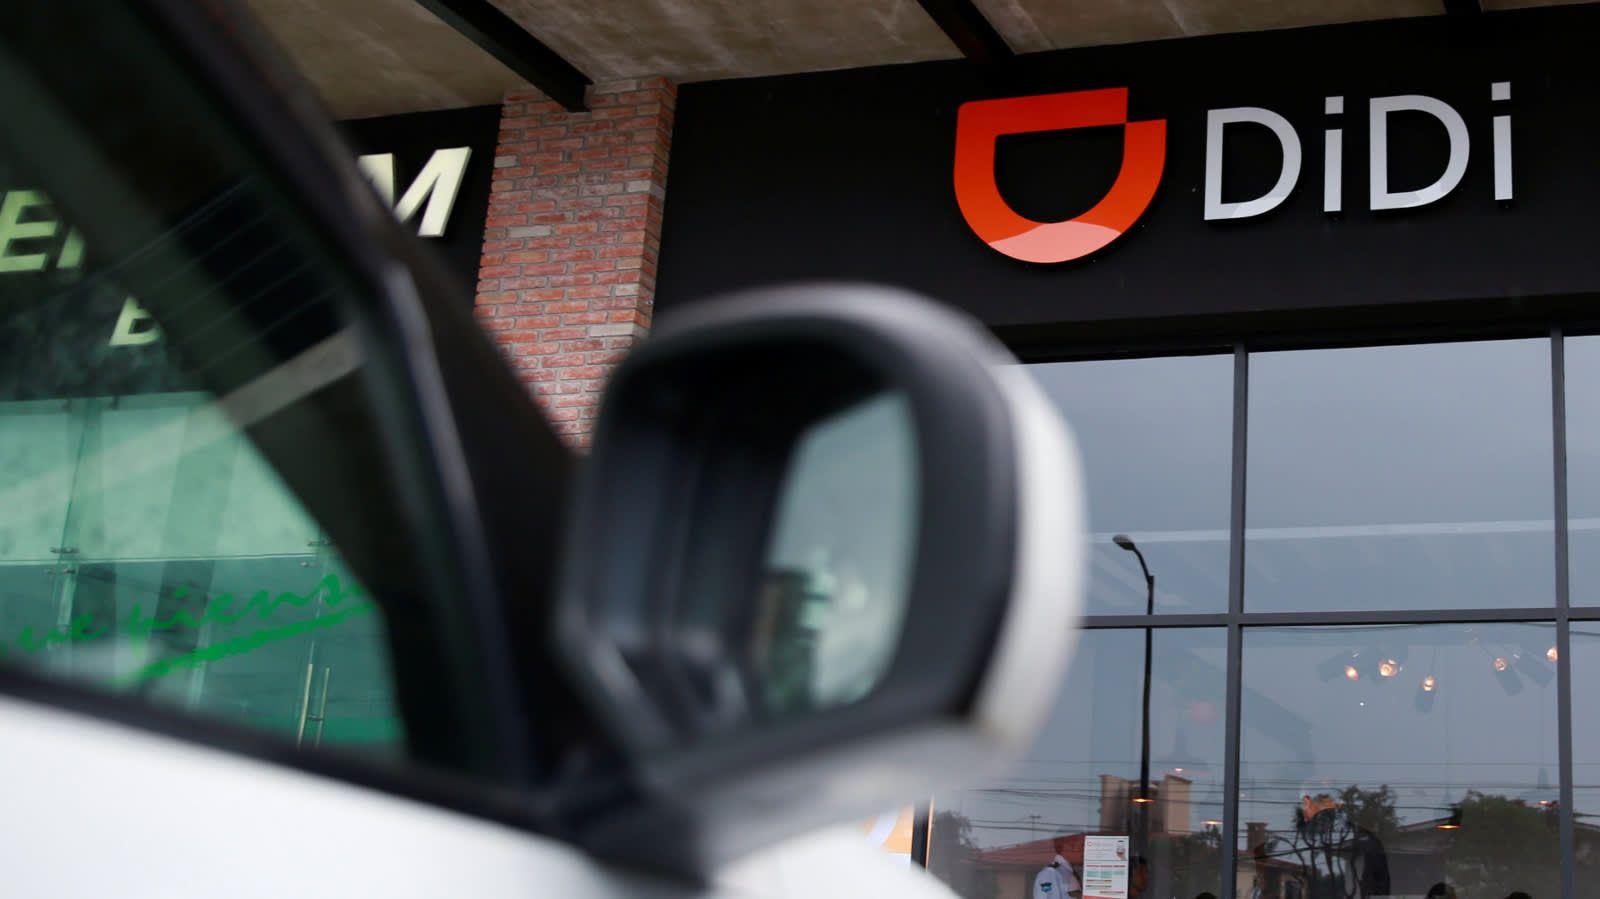 Didi Auto Logo - Didi forms global alliance for car sharing - Nikkei Asian Review